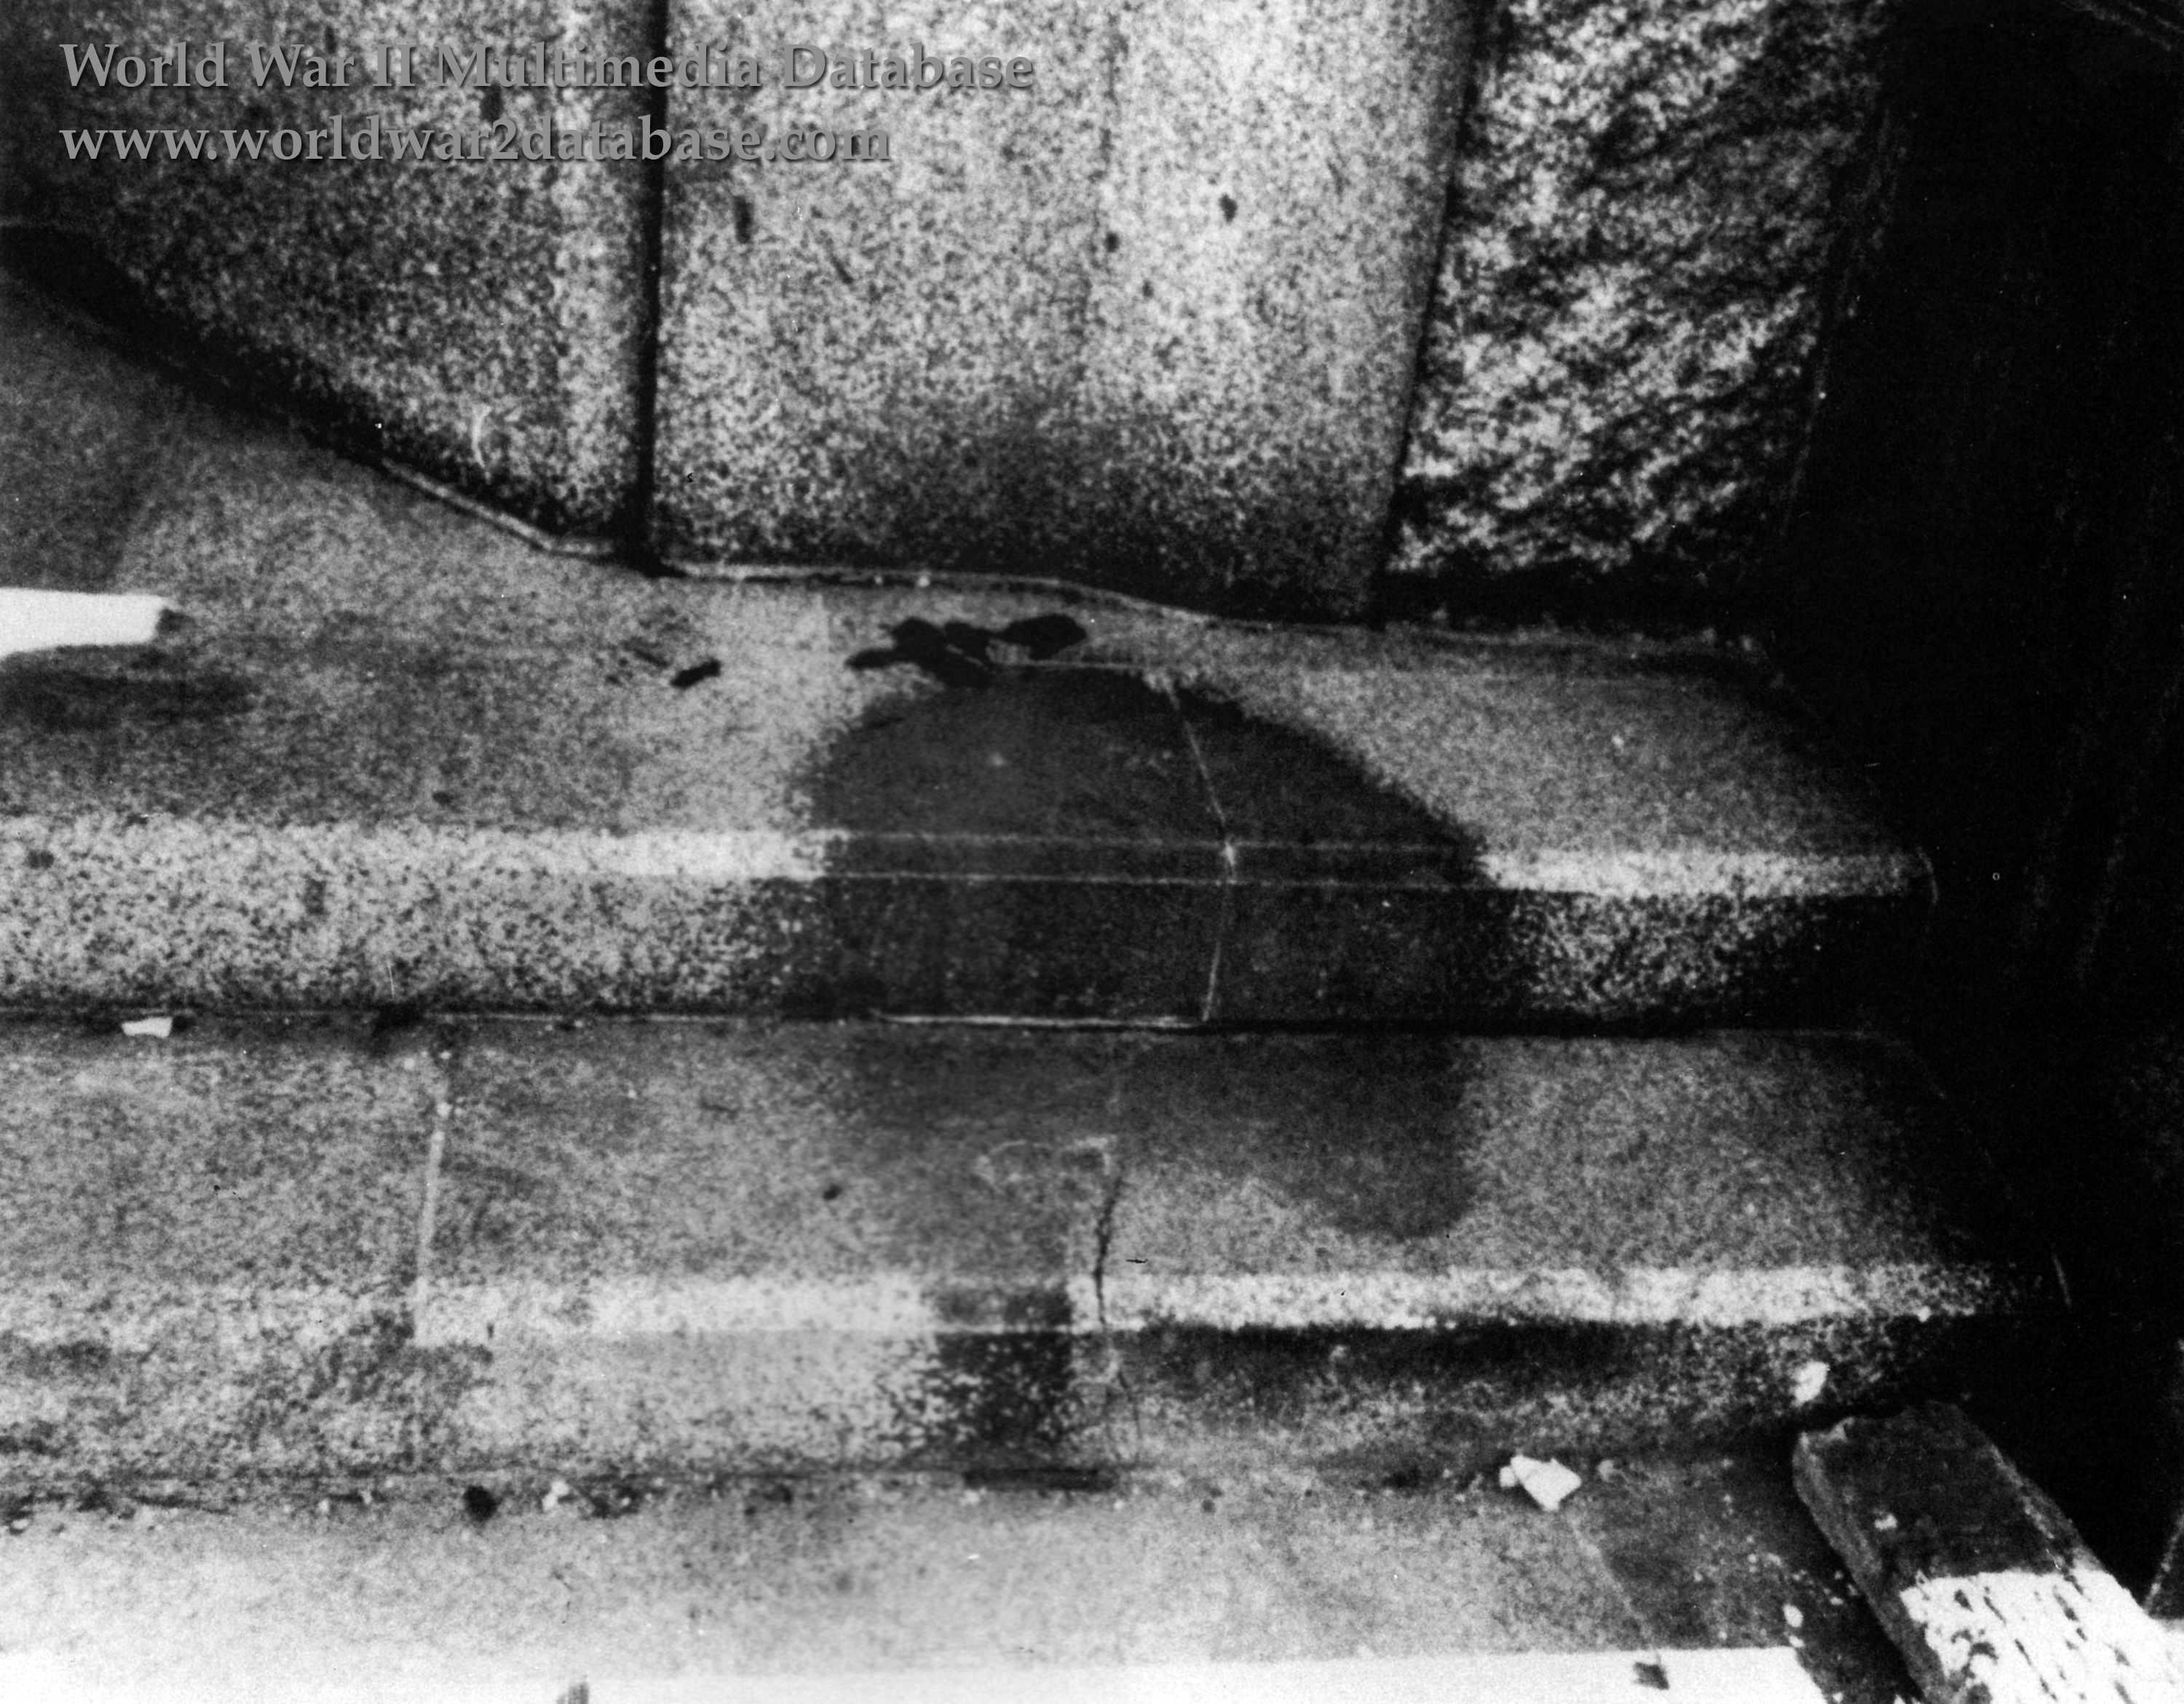 Human Shadow Etched In Stone | The World War II Multimedia Database